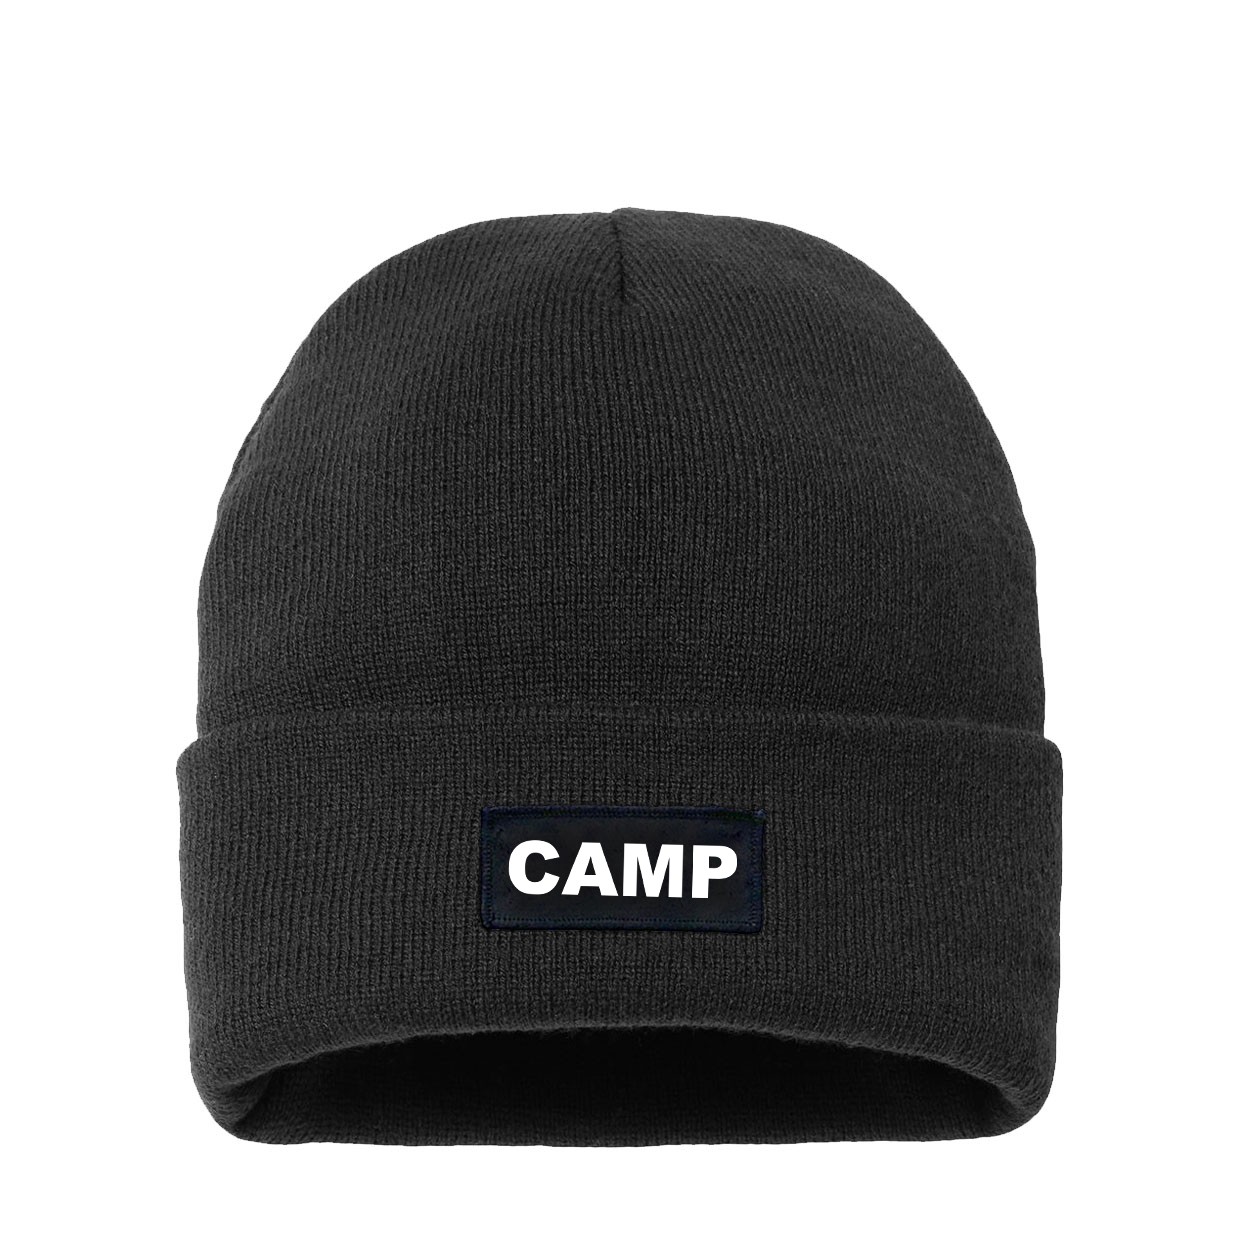 Camp Brand Logo Night Out Woven Patch Sherpa Lined Cuffed Beanie Black